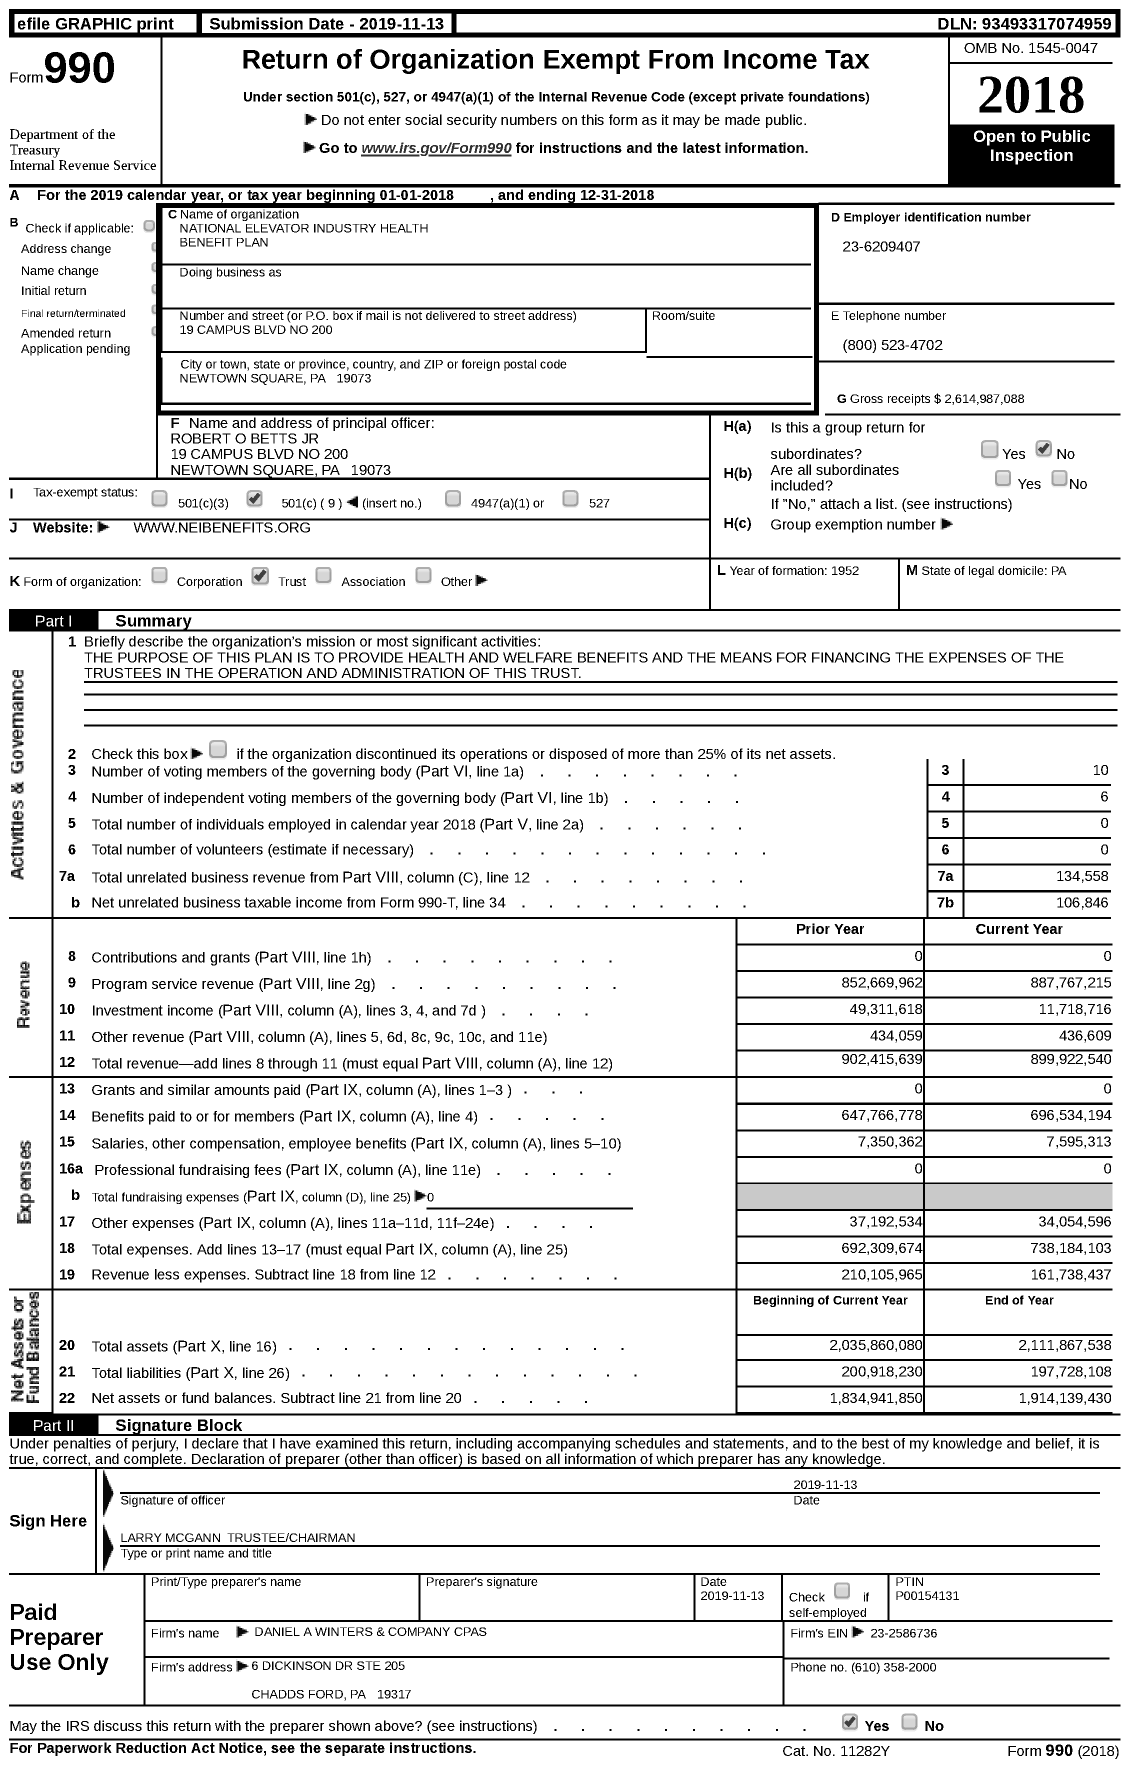 Image of first page of 2018 Form 990 for National Elevator Industry Health Benefit Plan